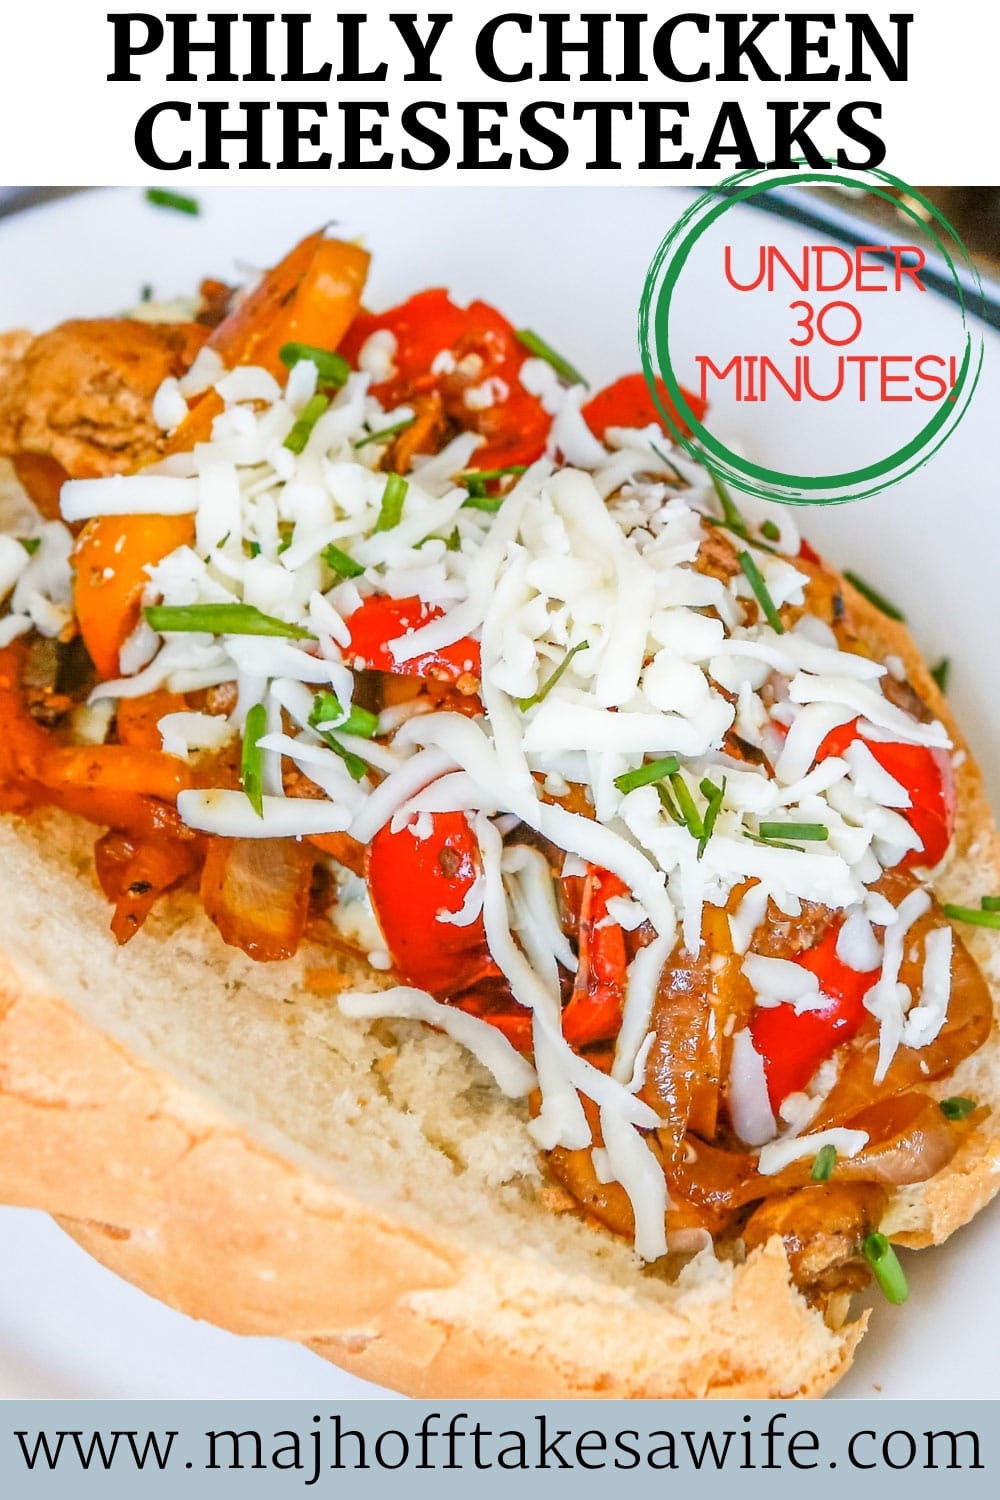 Chicken Cheesesteak puts a Philly style spin on the basic chicken sandwich! Served on hoagie buns and spread with homemade garlic aioli, this hearty sandwich is guaranteed to satisfy your cheesesteak cravings. Made in under 30 minutes and loaded with peppers, onions and chicken, this is the ideal weekday meal when you are in a time crunch! Philly chicken cheesesteak sandwiches are a HUGE hit! via @mrsmajorhoff